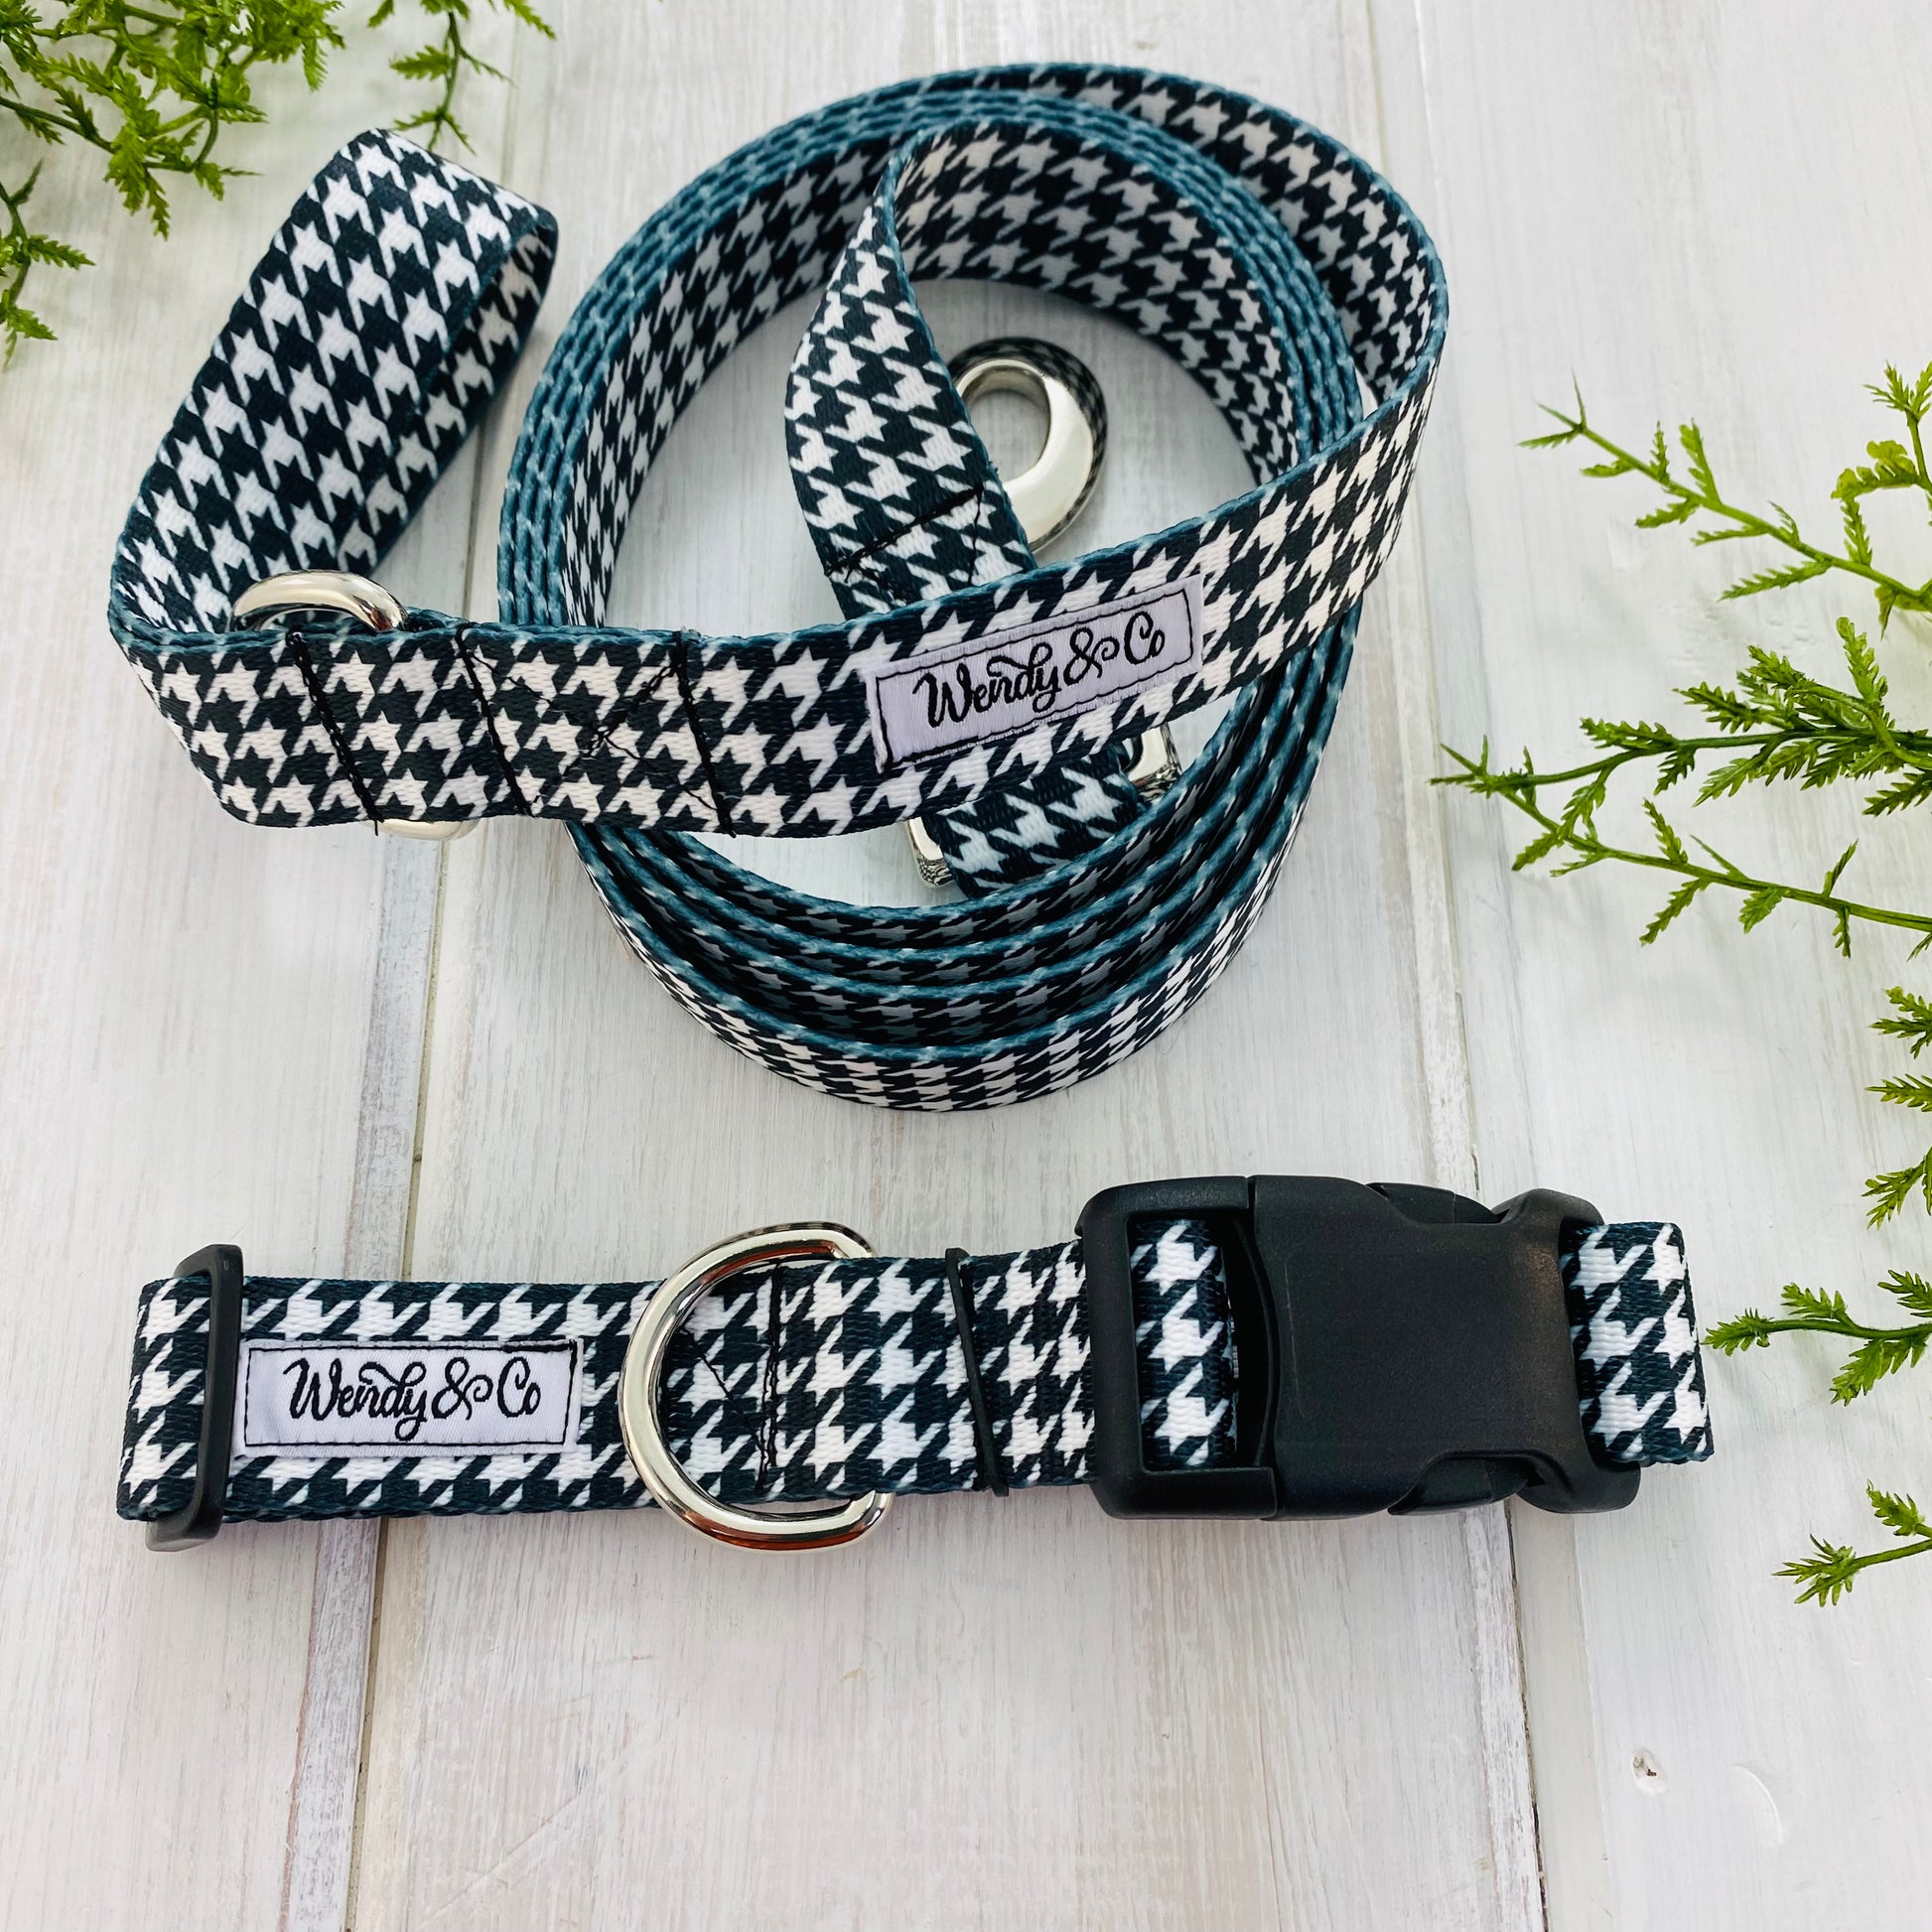 Black and white check 1" wide collar and leash, handmade.